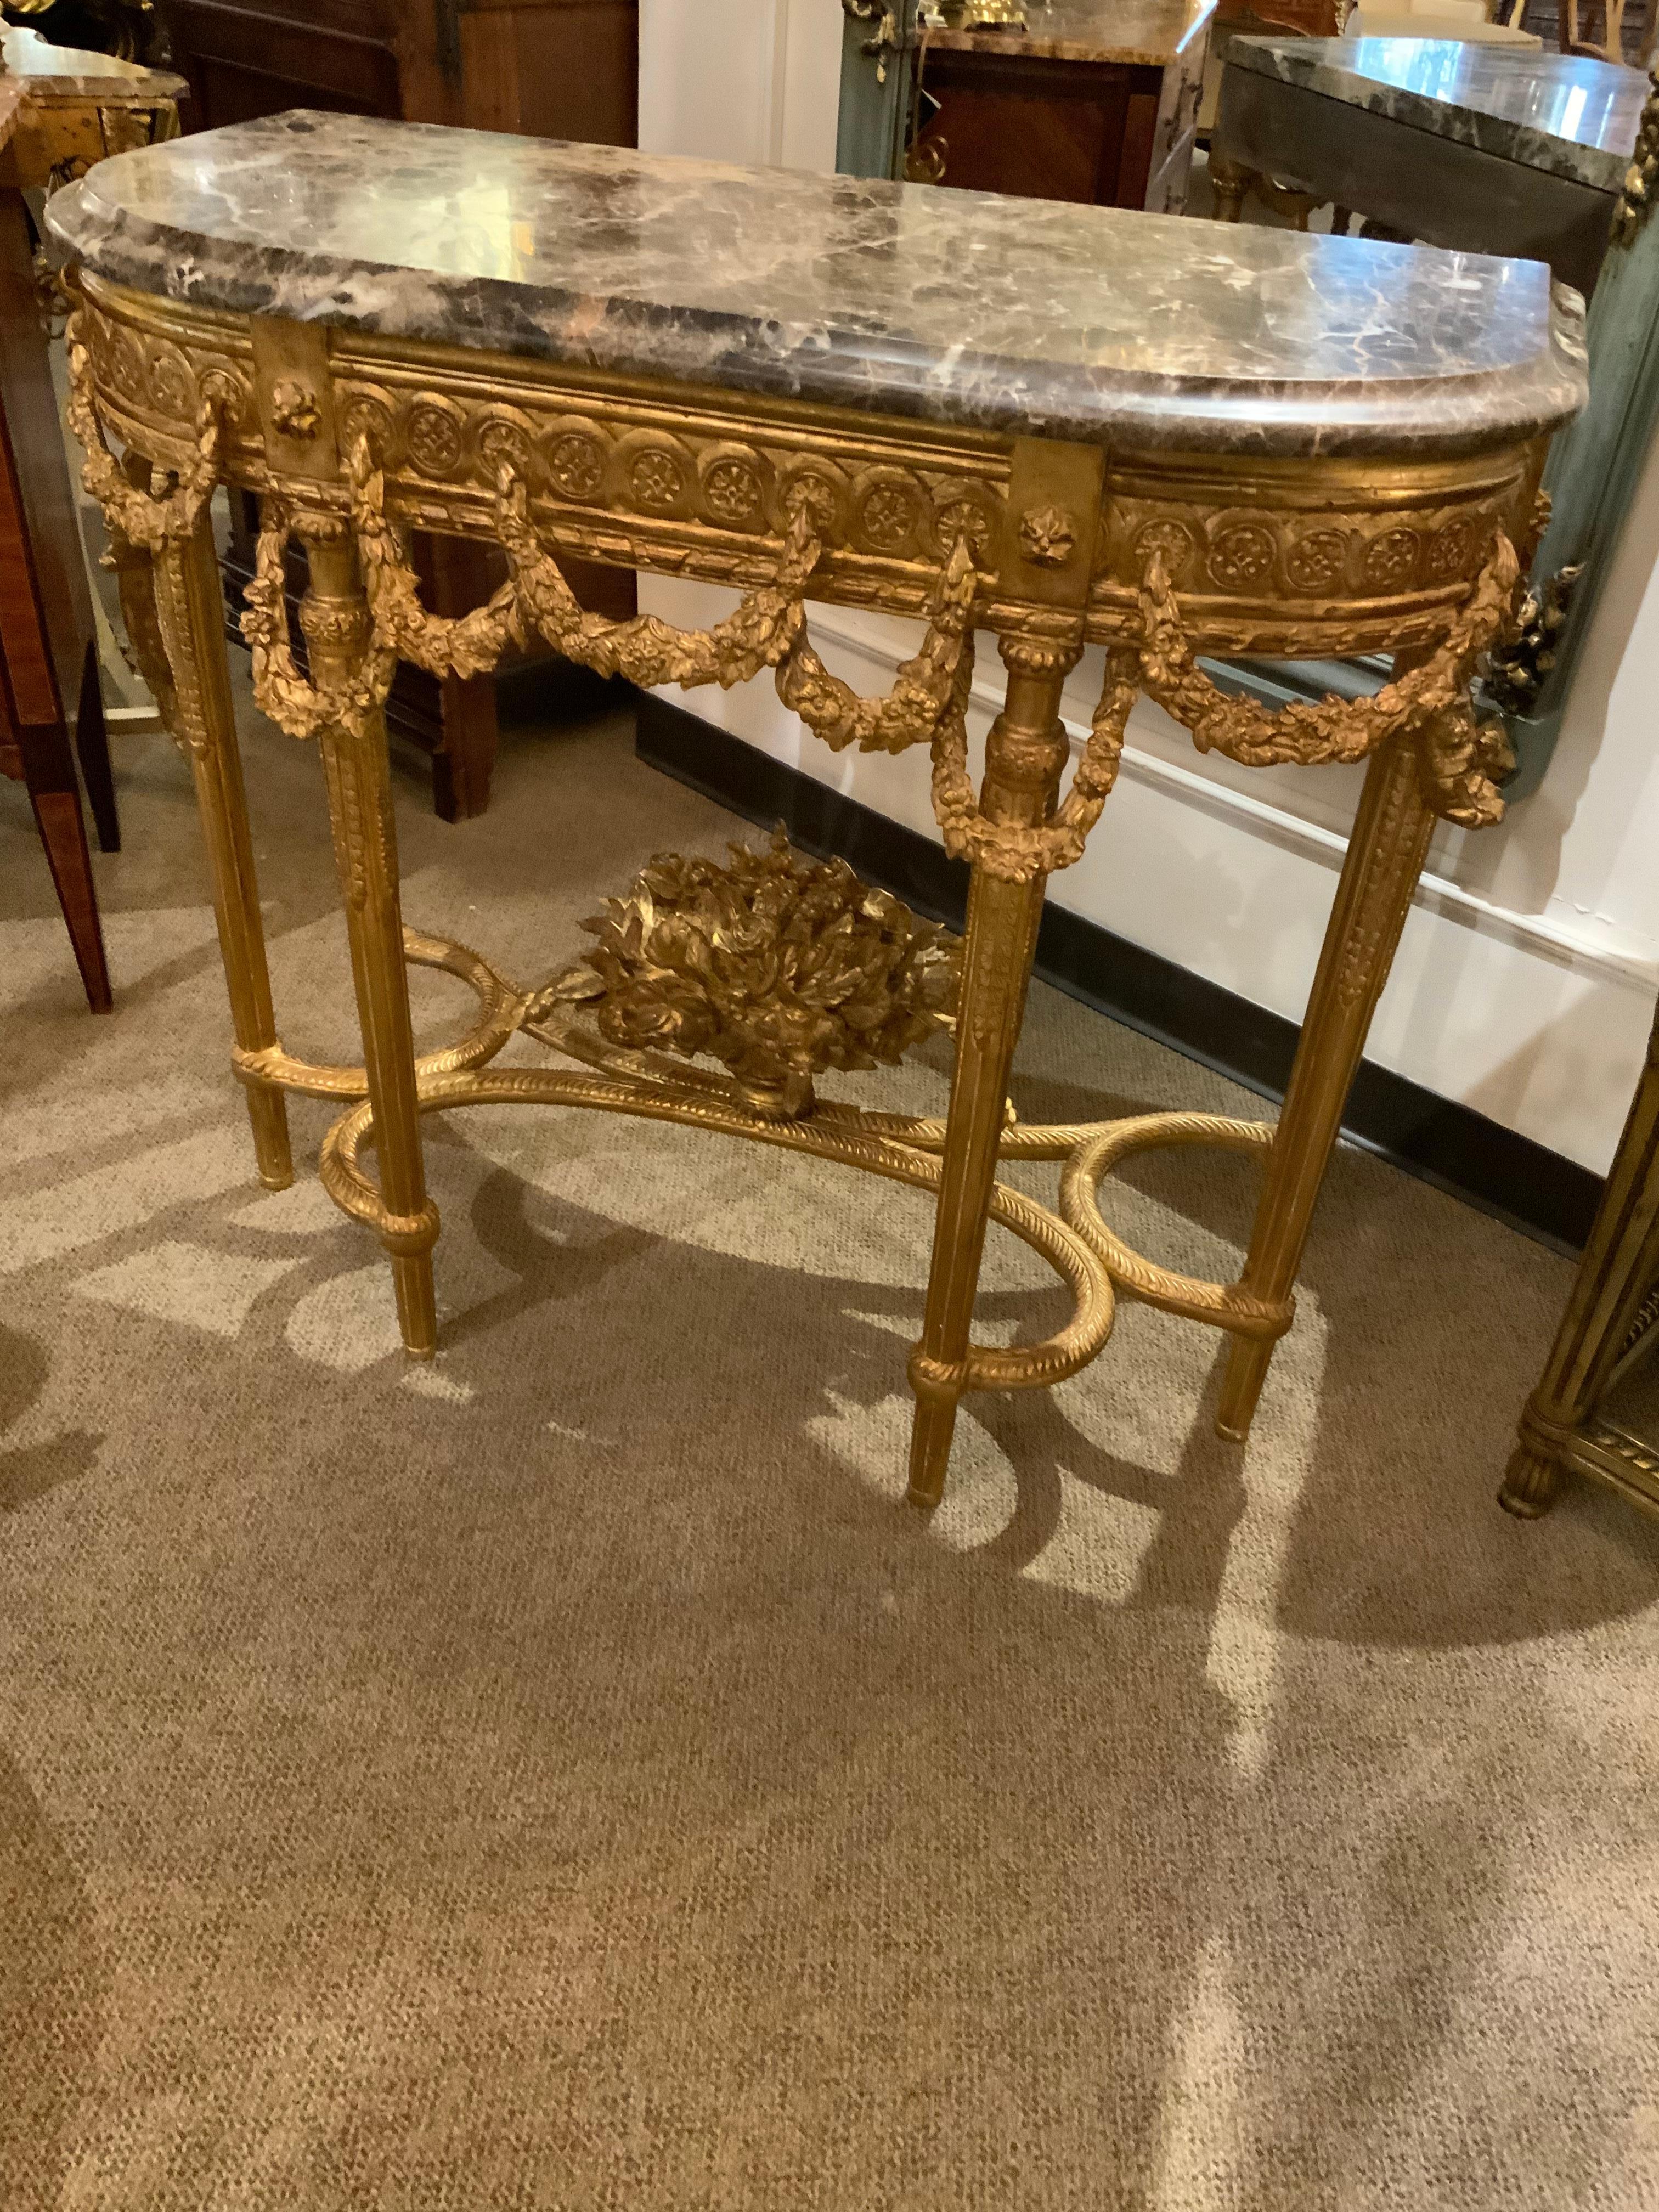 This is a pair of exceptional giltwood consoles in the Louis XVI-Style.
The carving is superb with draped floral garlands surrounding the base
Of the apron. At the lower portion of the piece the legs are connected 
By a stretcher which at the